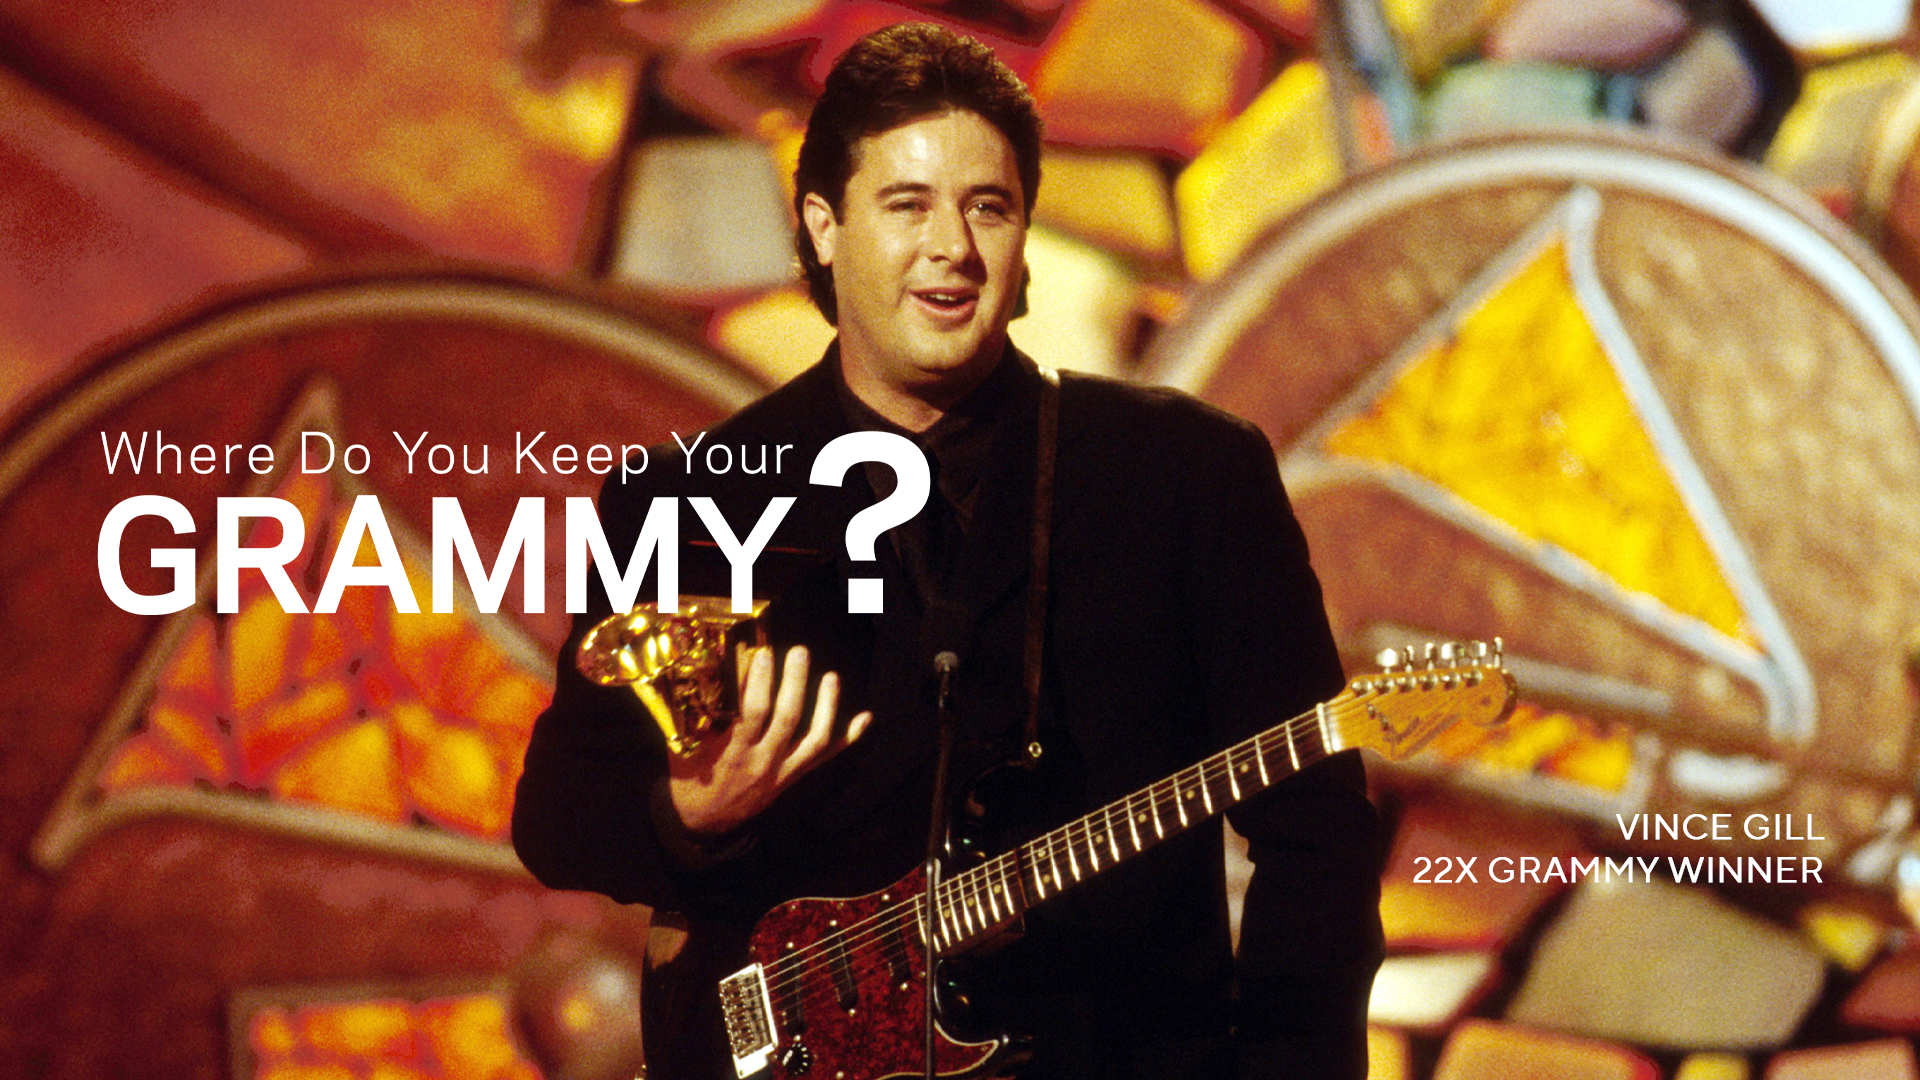 Watch Vince Gill Share His GRAMMY Success With Those Who Shaped His Music Career | Where Do You Keep Your GRAMMY?